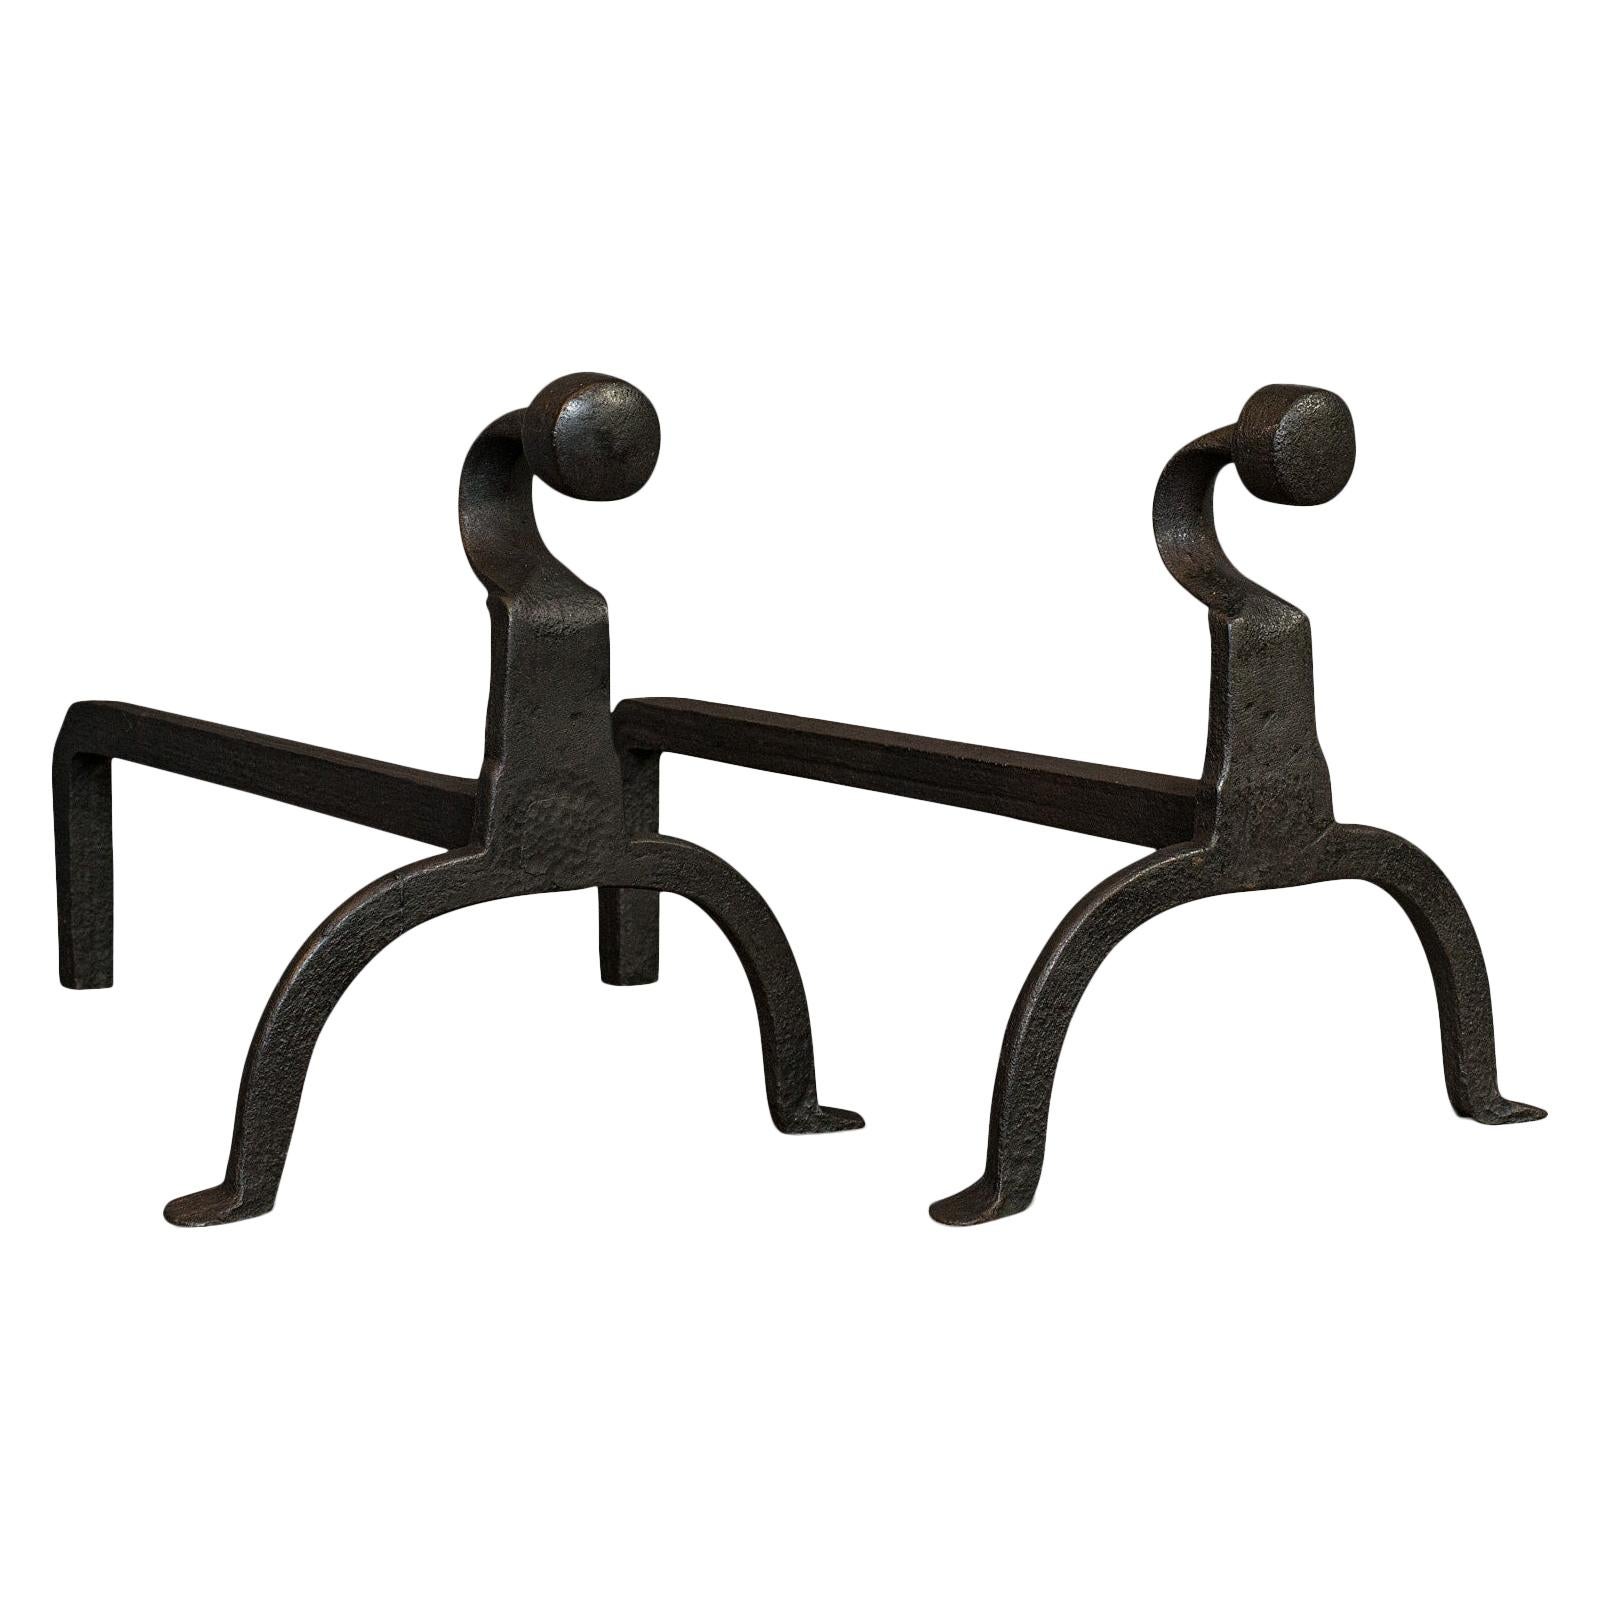 Antique, Pair of, Firedogs, English, Wrought Iron, Victorian, Fireside, Andirons